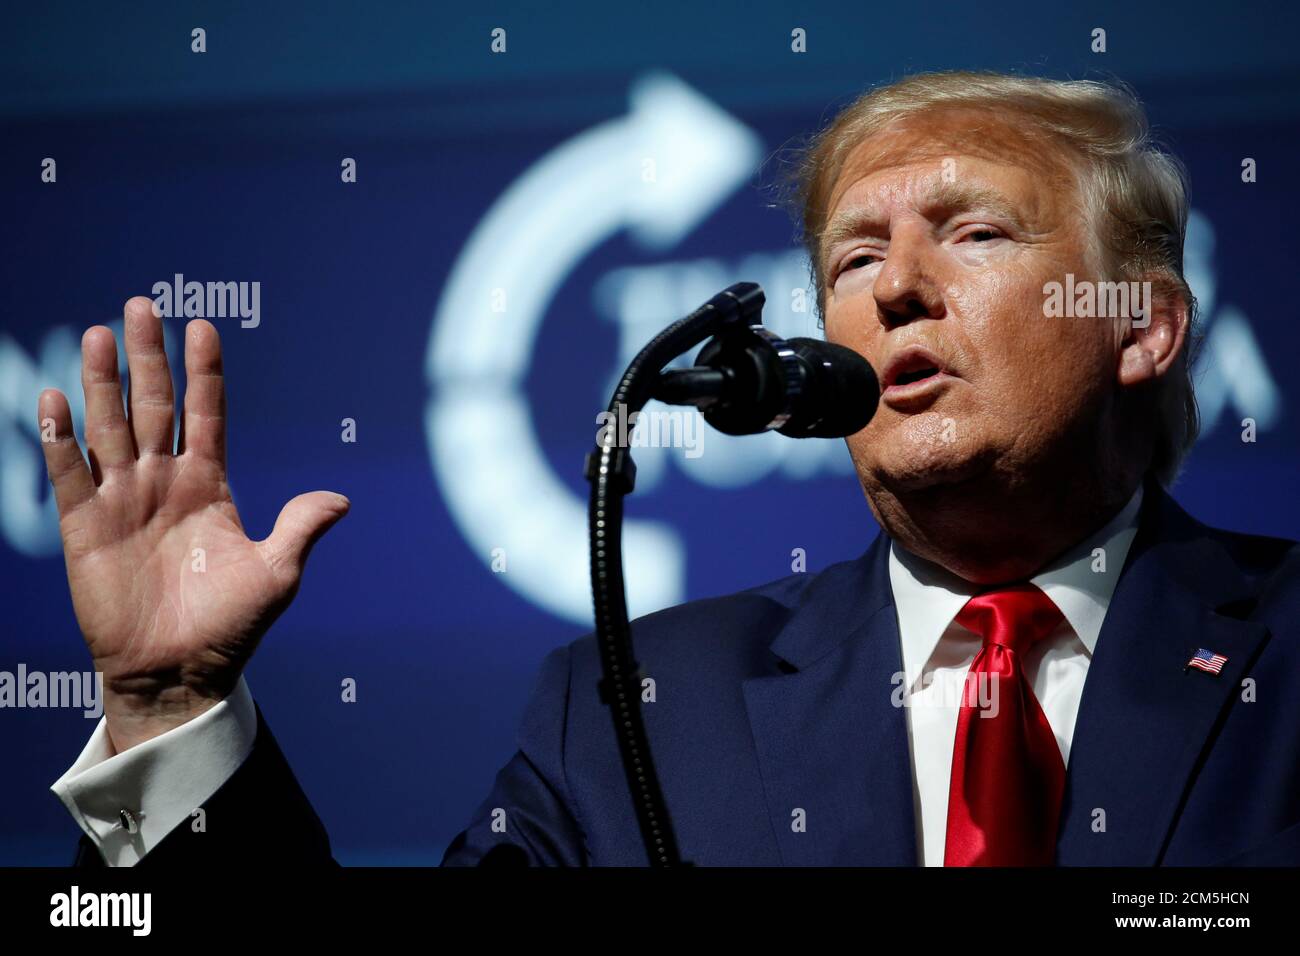 U.S. President Donald Trump delivers remarks at the Turning Point USA Student Action Summit at the Palm Beach County Convention Center in West Palm Beach, Florida, U.S. December 21, 2019. REUTERS/Marco Bello Stock Photo